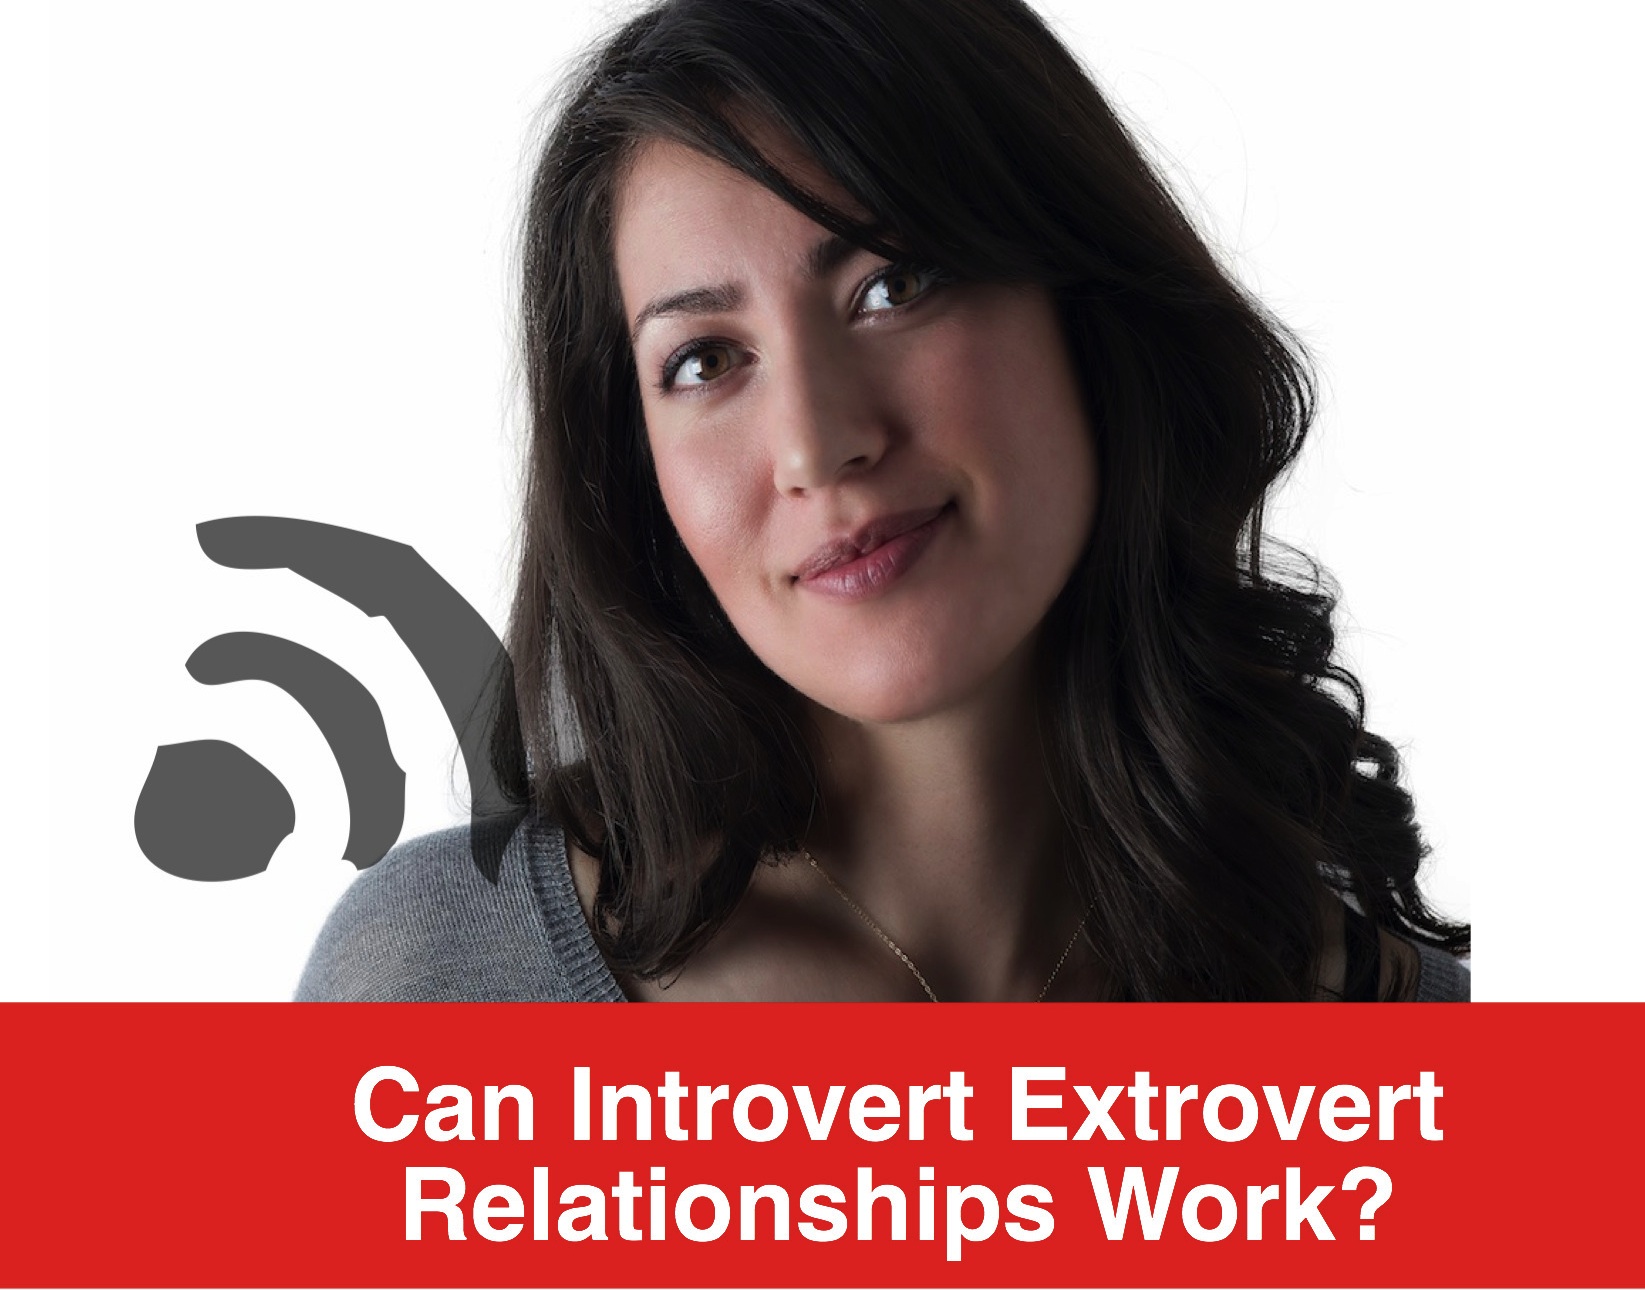 Podcast: Can Introvert Extrovert Relationships Work?